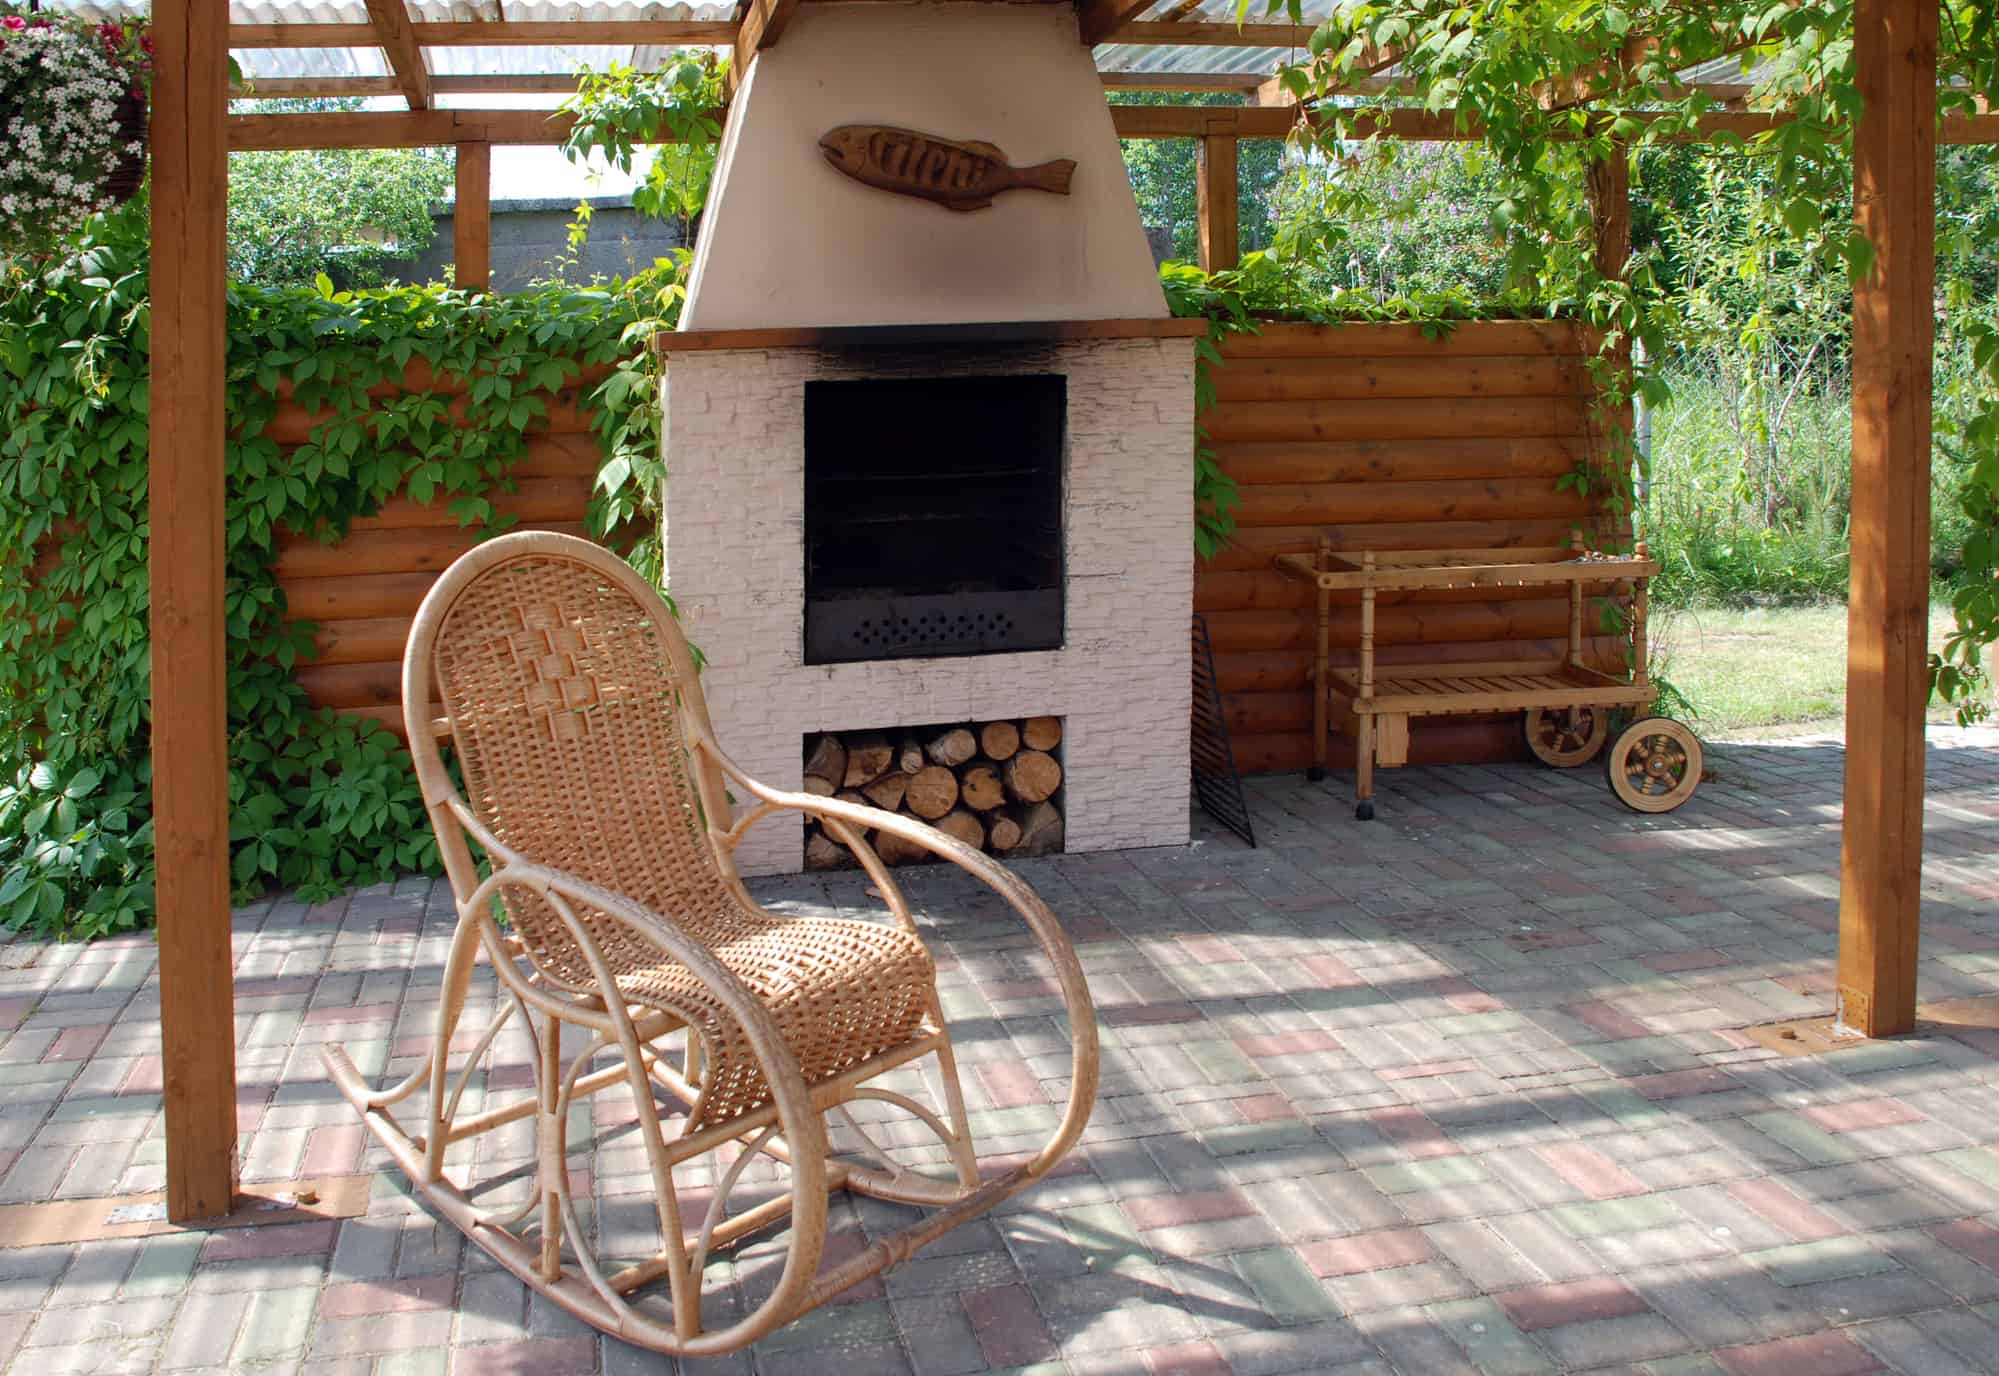 Does an Outdoor Fireplace Need a Flue Liner?